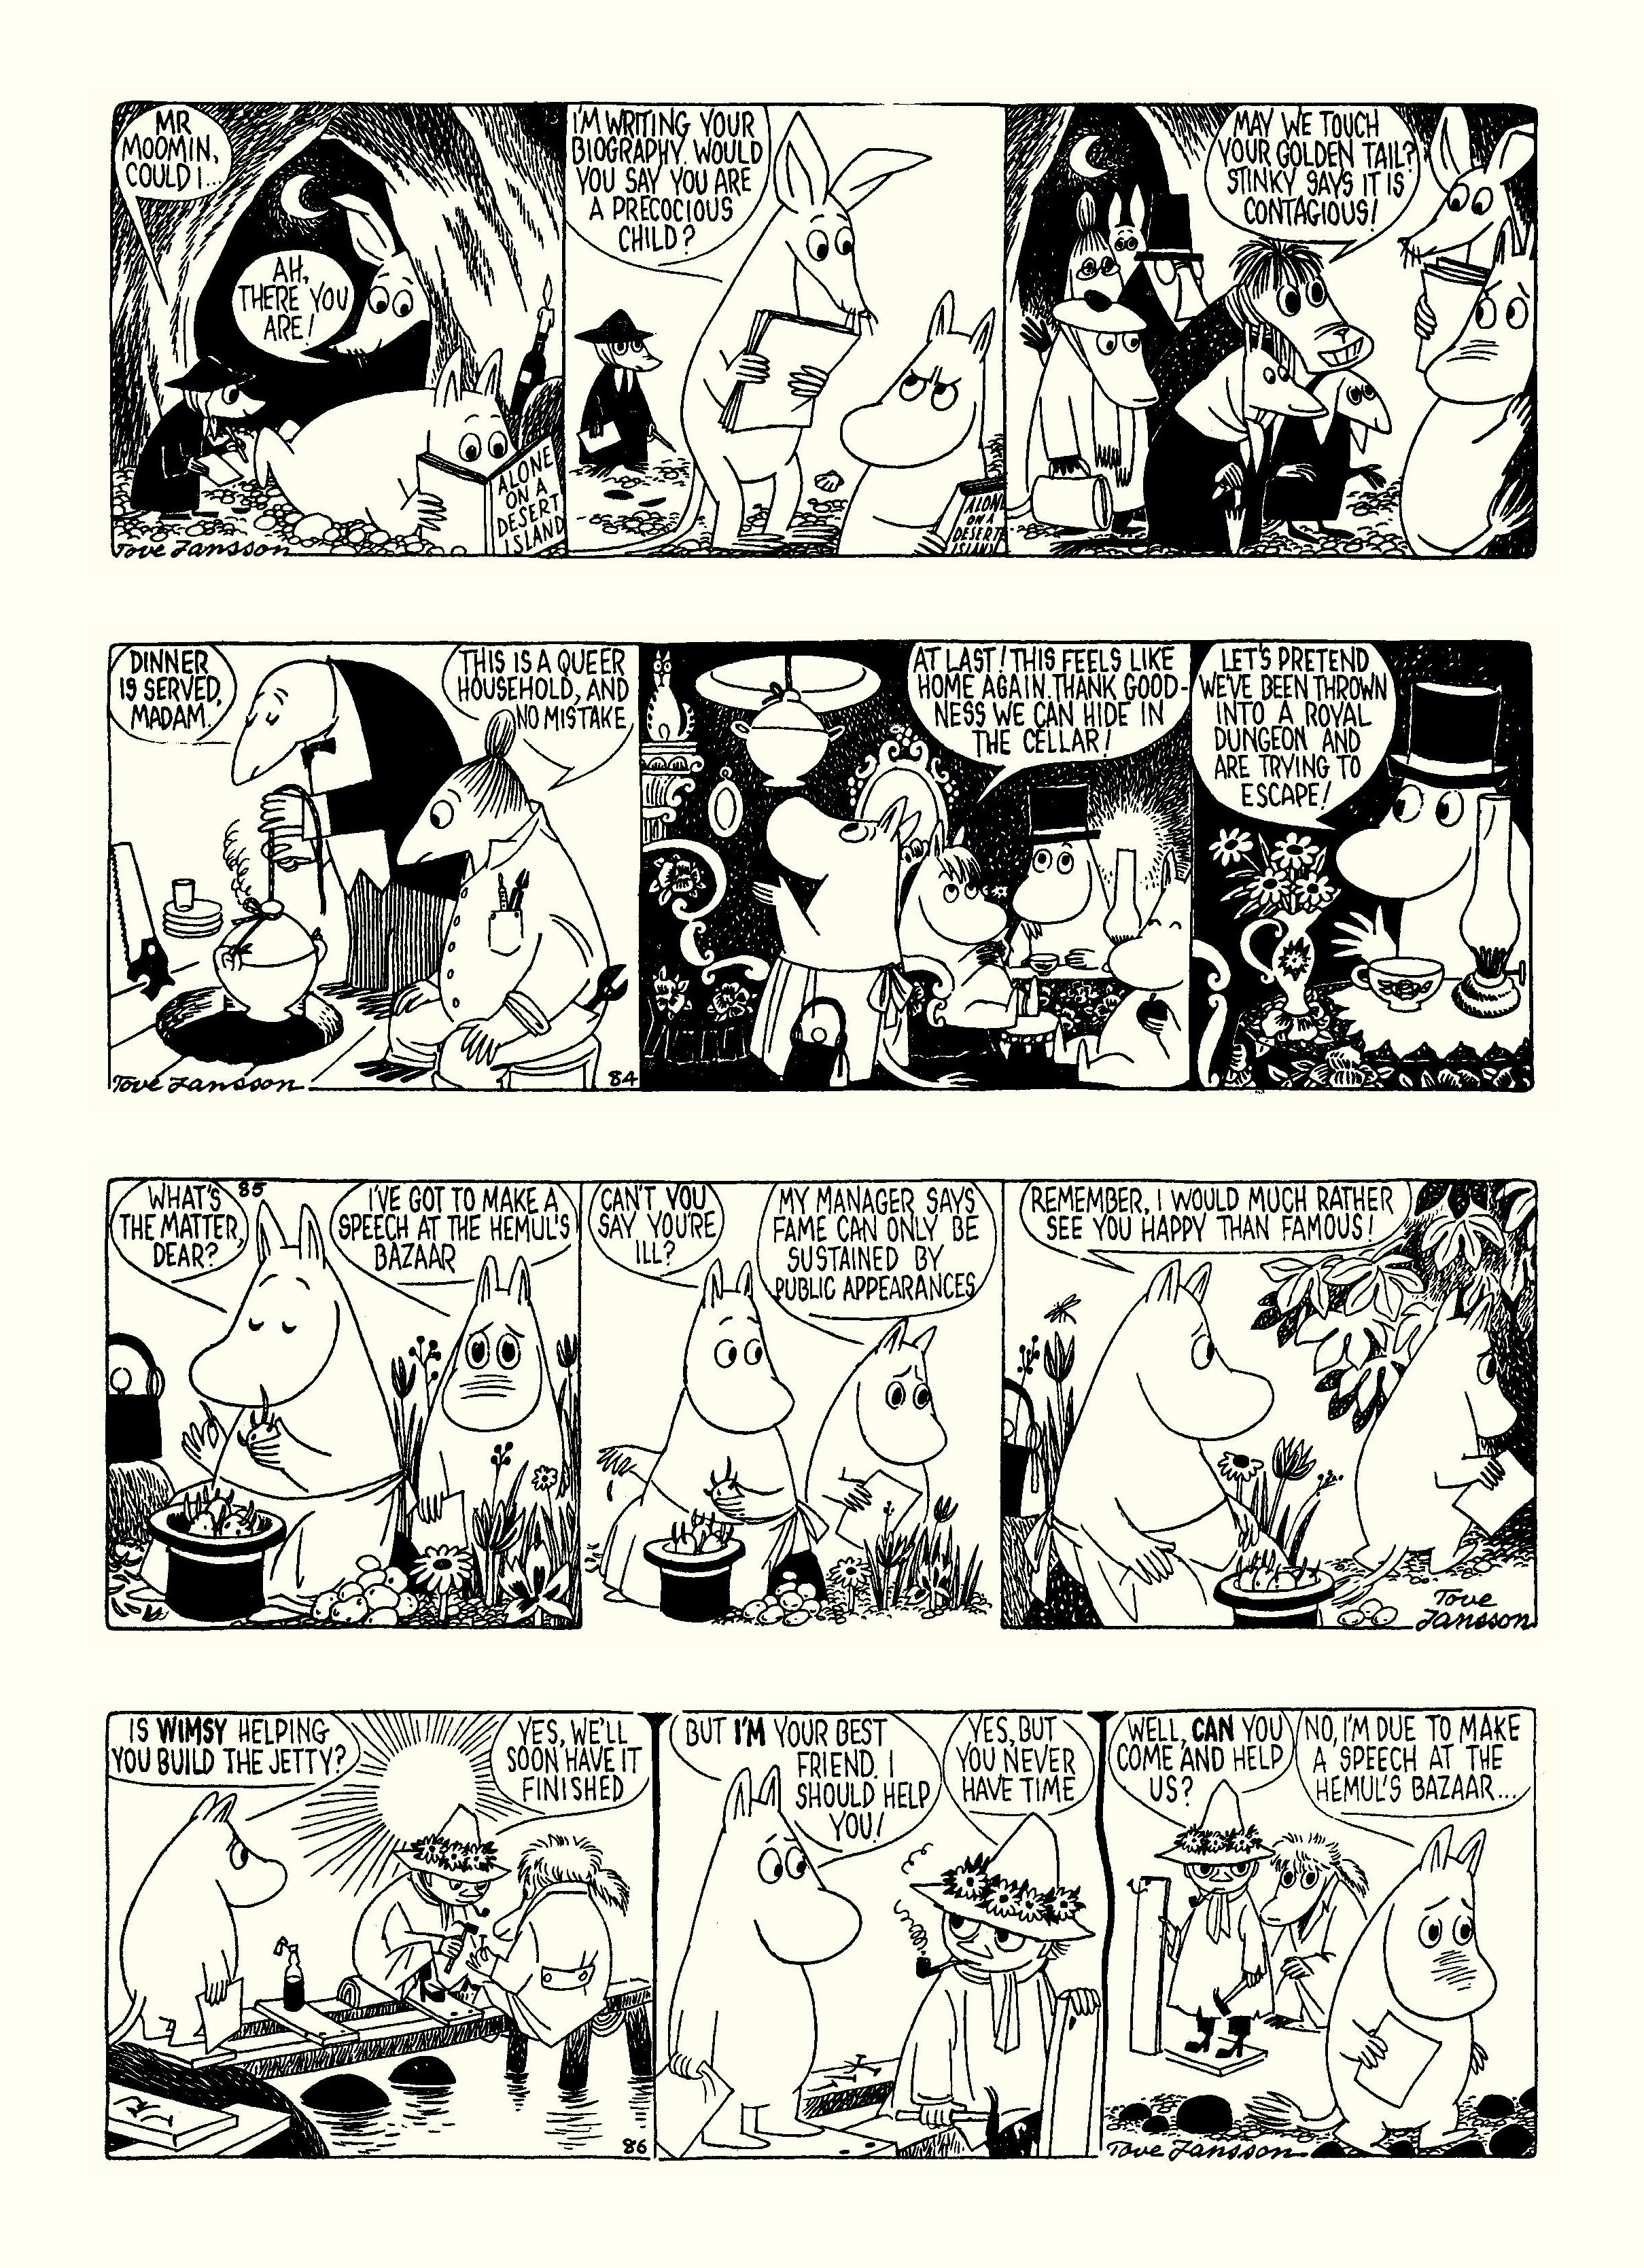 Read online Moomin: The Complete Tove Jansson Comic Strip comic -  Issue # TPB 4 - 100